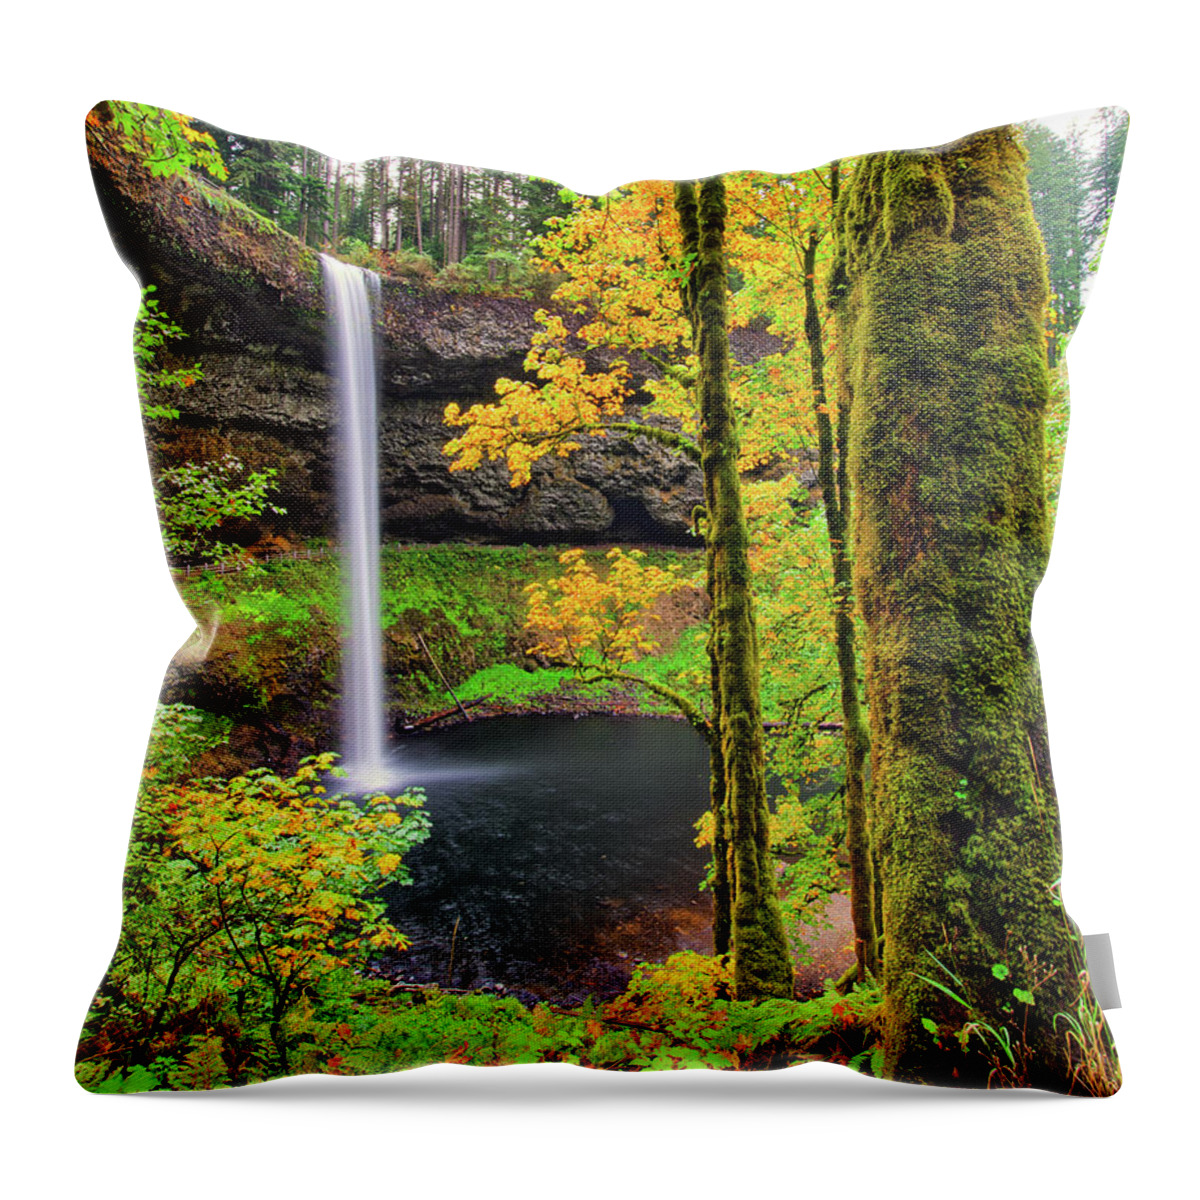 Oregon Throw Pillow featuring the photograph South Silver Falls by Jedediah Hohf